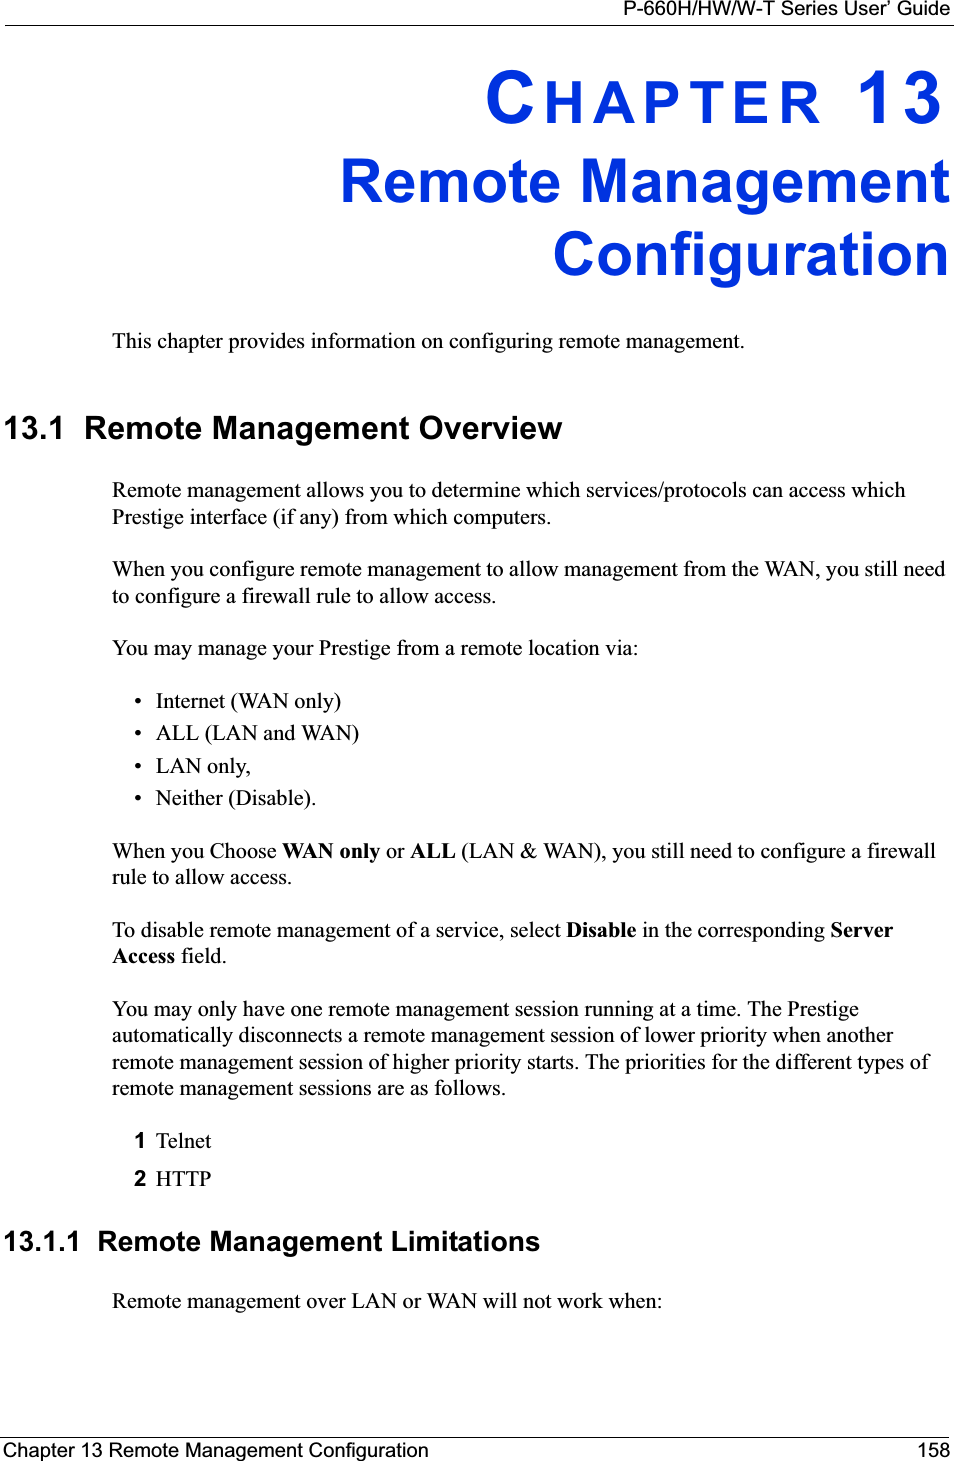 P-660H/HW/W-T Series User’ GuideChapter 13 Remote Management Configuration 158CHAPTER 13Remote ManagementConfigurationThis chapter provides information on configuring remote management.13.1  Remote Management Overview Remote management allows you to determine which services/protocols can access which Prestige interface (if any) from which computers.When you configure remote management to allow management from the WAN, you still need to configure a firewall rule to allow access.You may manage your Prestige from a remote location via:• Internet (WAN only)• ALL (LAN and WAN)• LAN only, • Neither (Disable).When you Choose WAN o n ly  or ALL (LAN &amp; WAN), you still need to configure a firewall rule to allow access.To disable remote management of a service, select Disable in the corresponding Server Access field.You may only have one remote management session running at a time. The Prestige automatically disconnects a remote management session of lower priority when another remote management session of higher priority starts. The priorities for the different types of remote management sessions are as follows.1Telnet2HTTP13.1.1  Remote Management LimitationsRemote management over LAN or WAN will not work when: